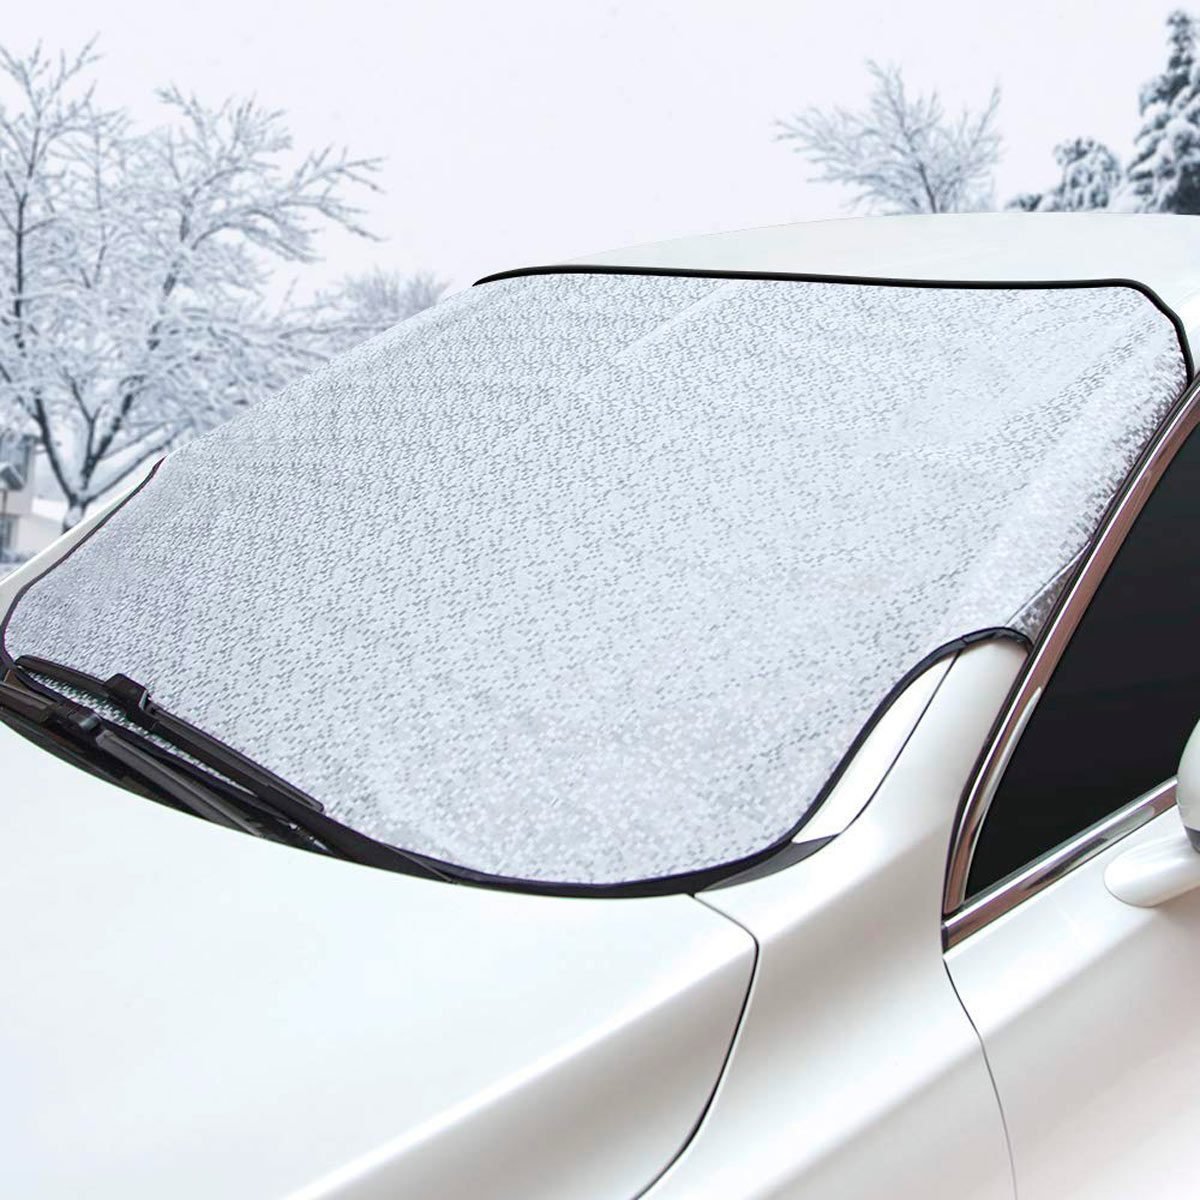 Large Windshield Cover with 2 Side Mirror Covers,Four Layers Protection with Magnetic Edge for Snow Car Windshield Snow Cover Ice Frost Defense Suitable for Most Cars &Vehicles Sun 